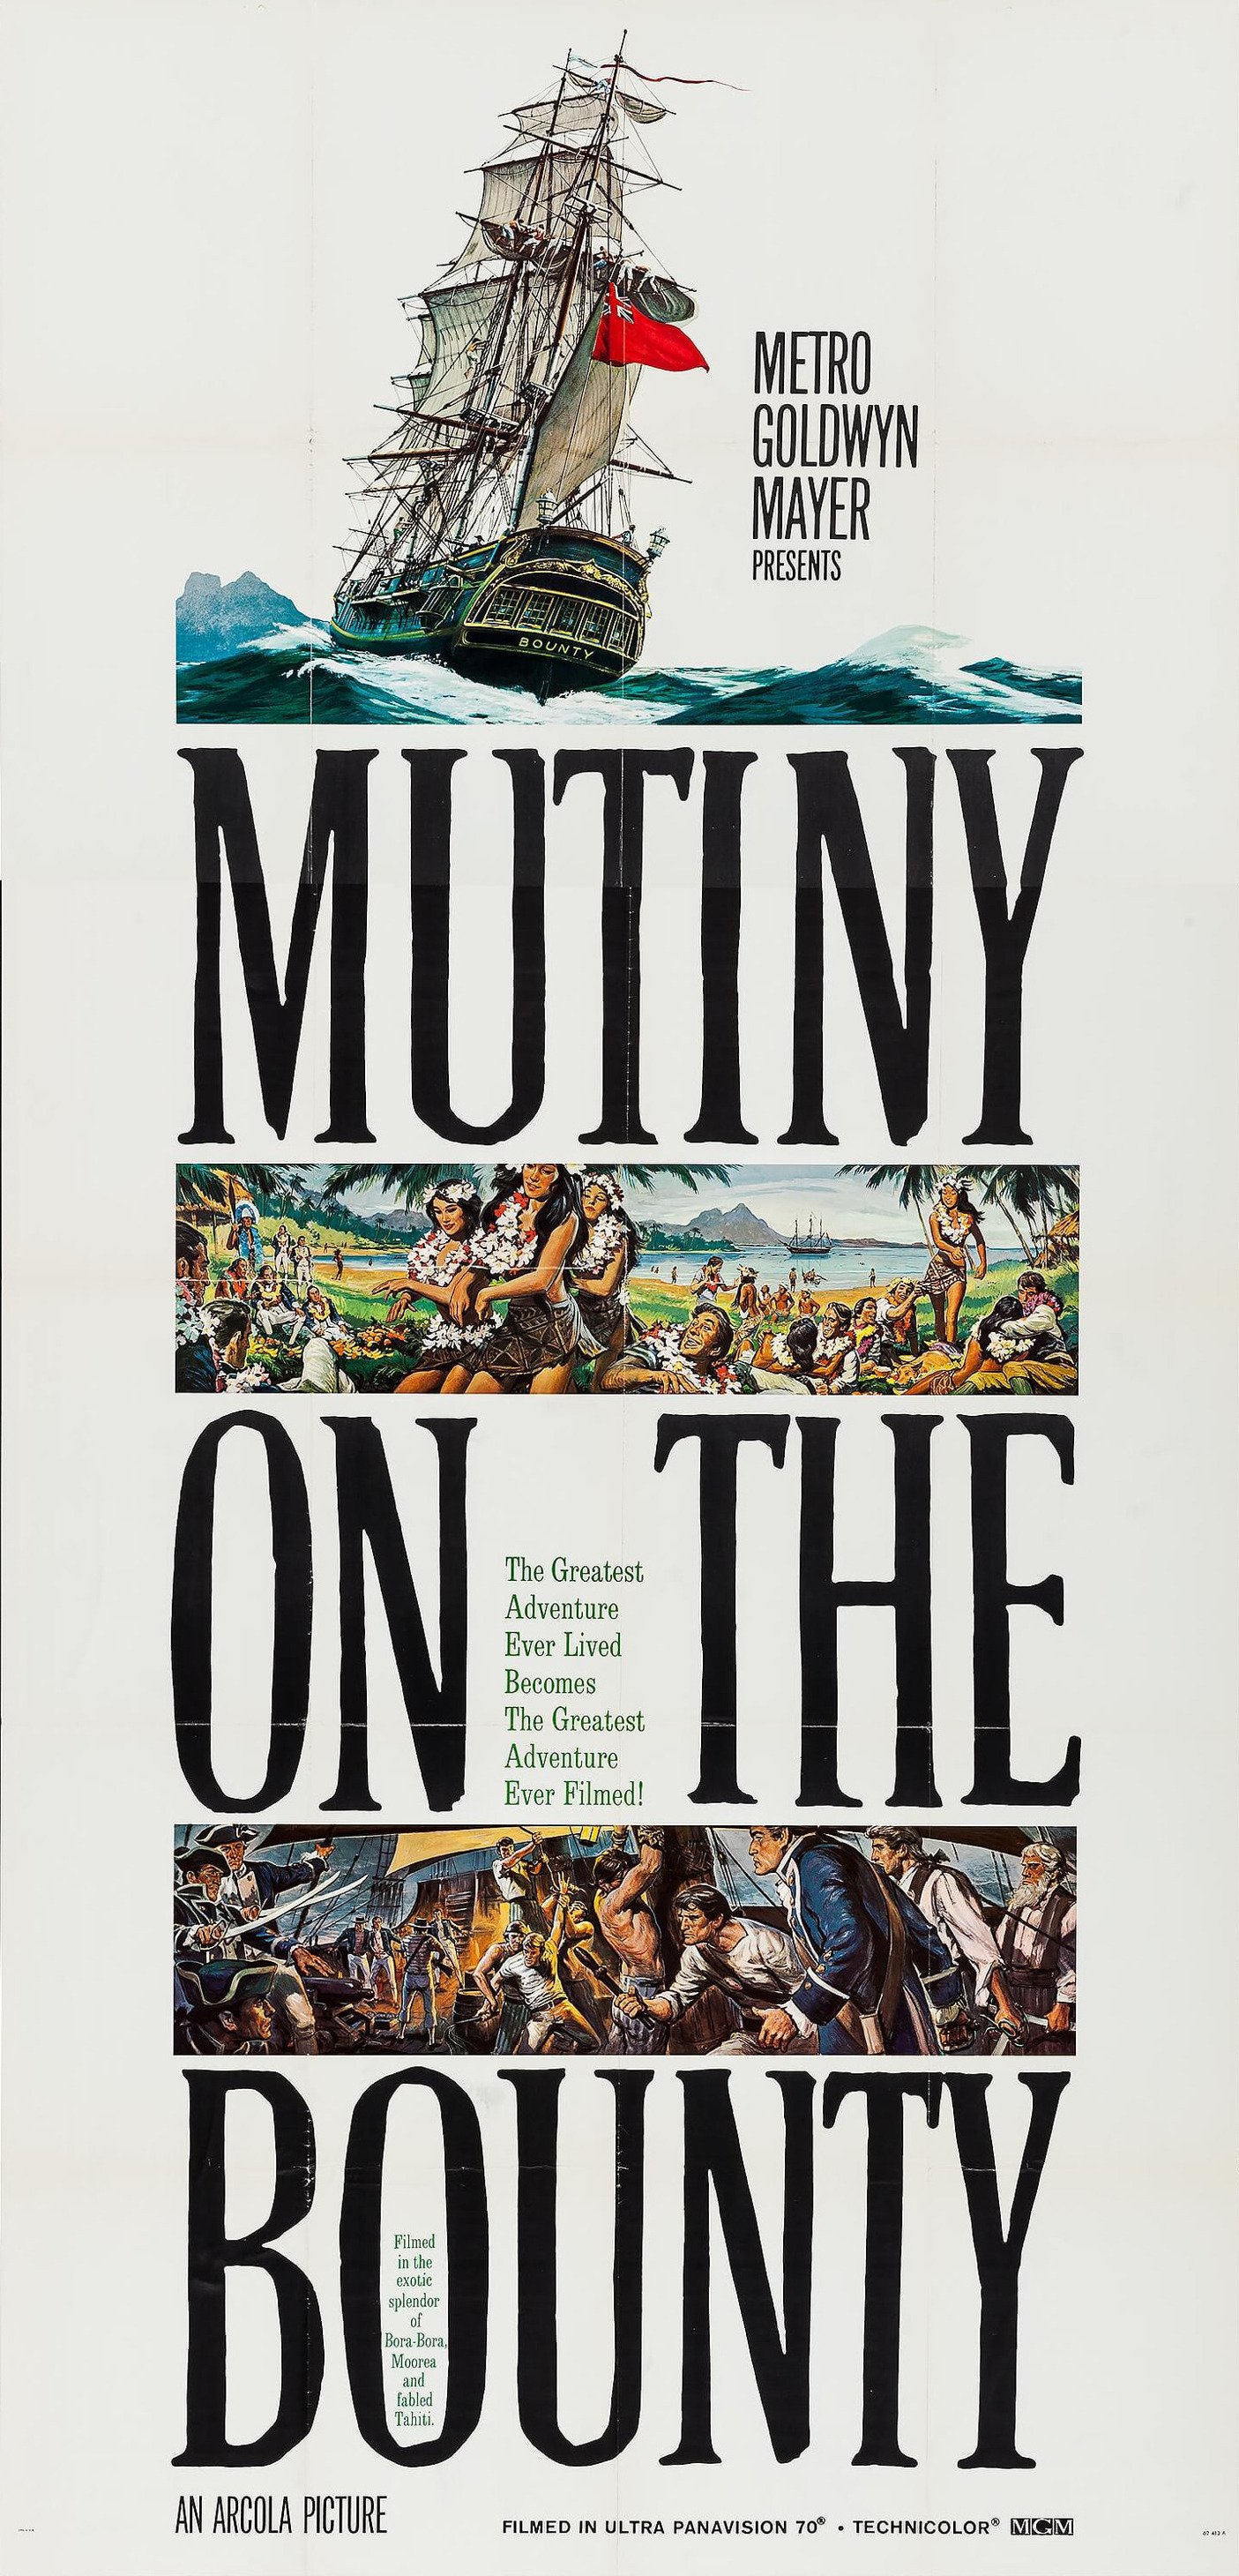 Mega Sized Movie Poster Image for Mutiny on the Bounty (#4 of 16)